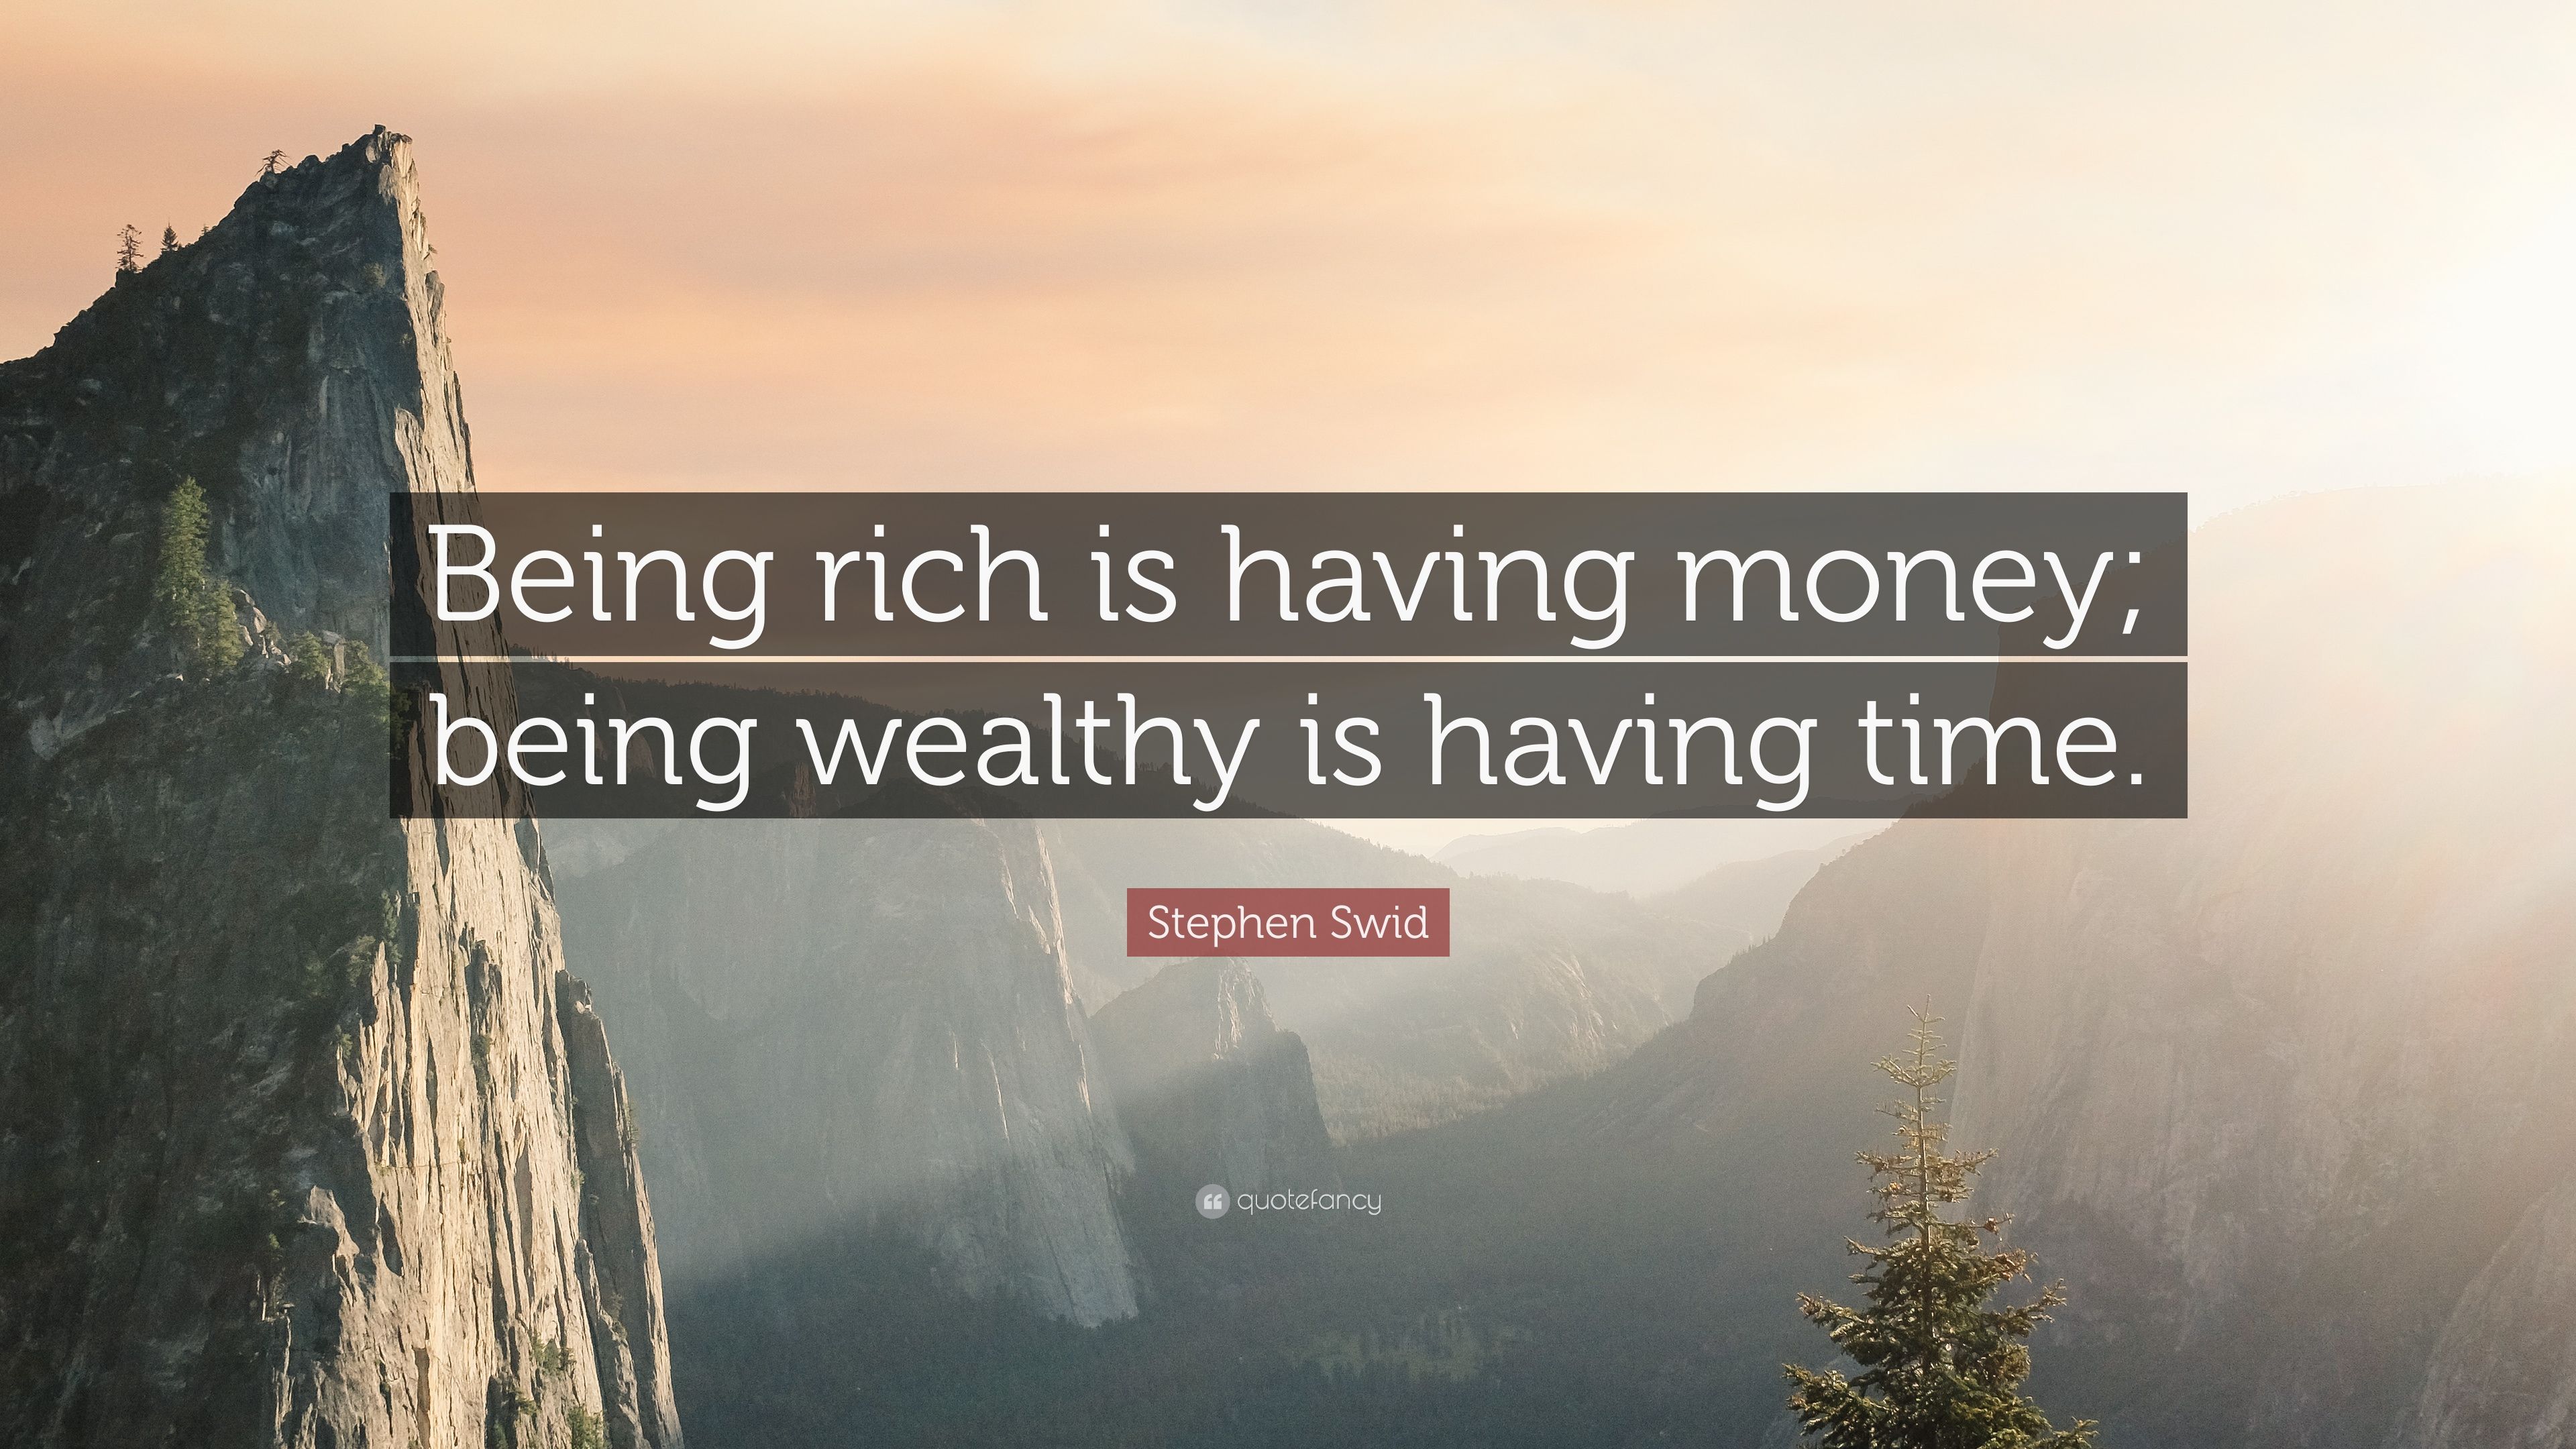 Stephen Swid Quote: “Being rich is having money; being wealthy is